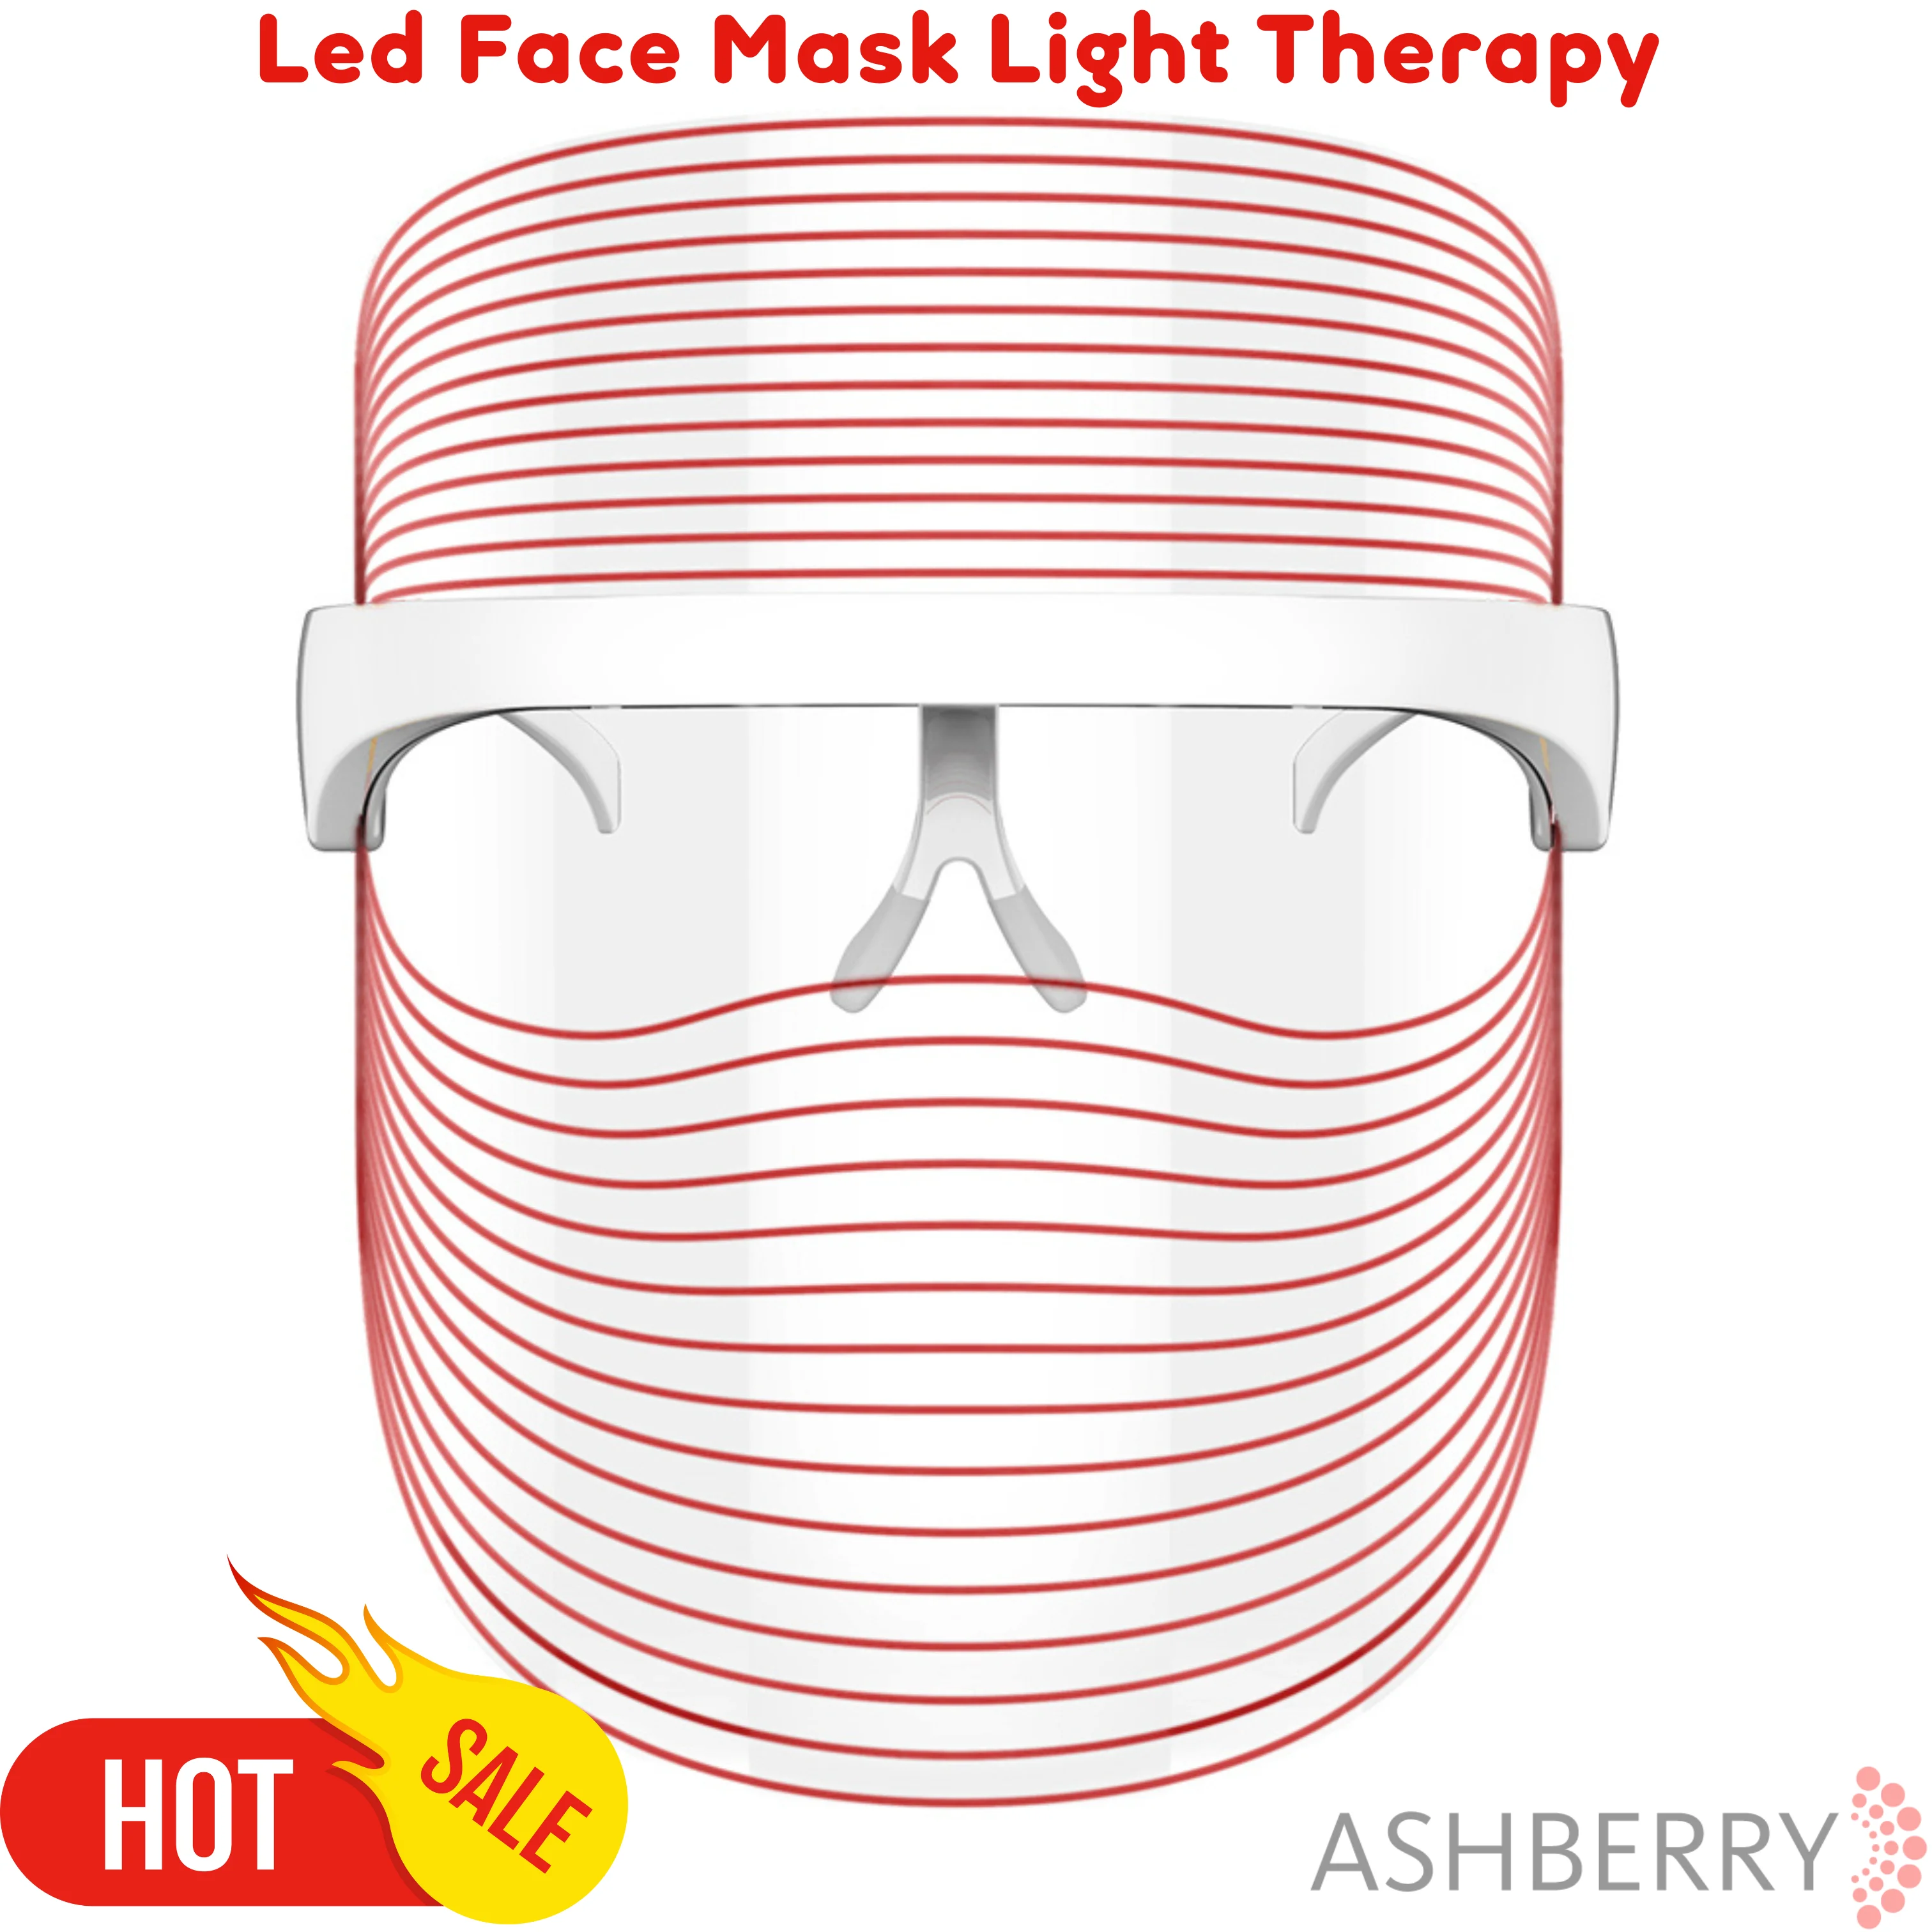 ASHBERRY7 Led Light Therapy Facial Ski Beauty Skin Rejuvenation Photon Mask LED Face Mask Light Therapy Beauty Device for Facial